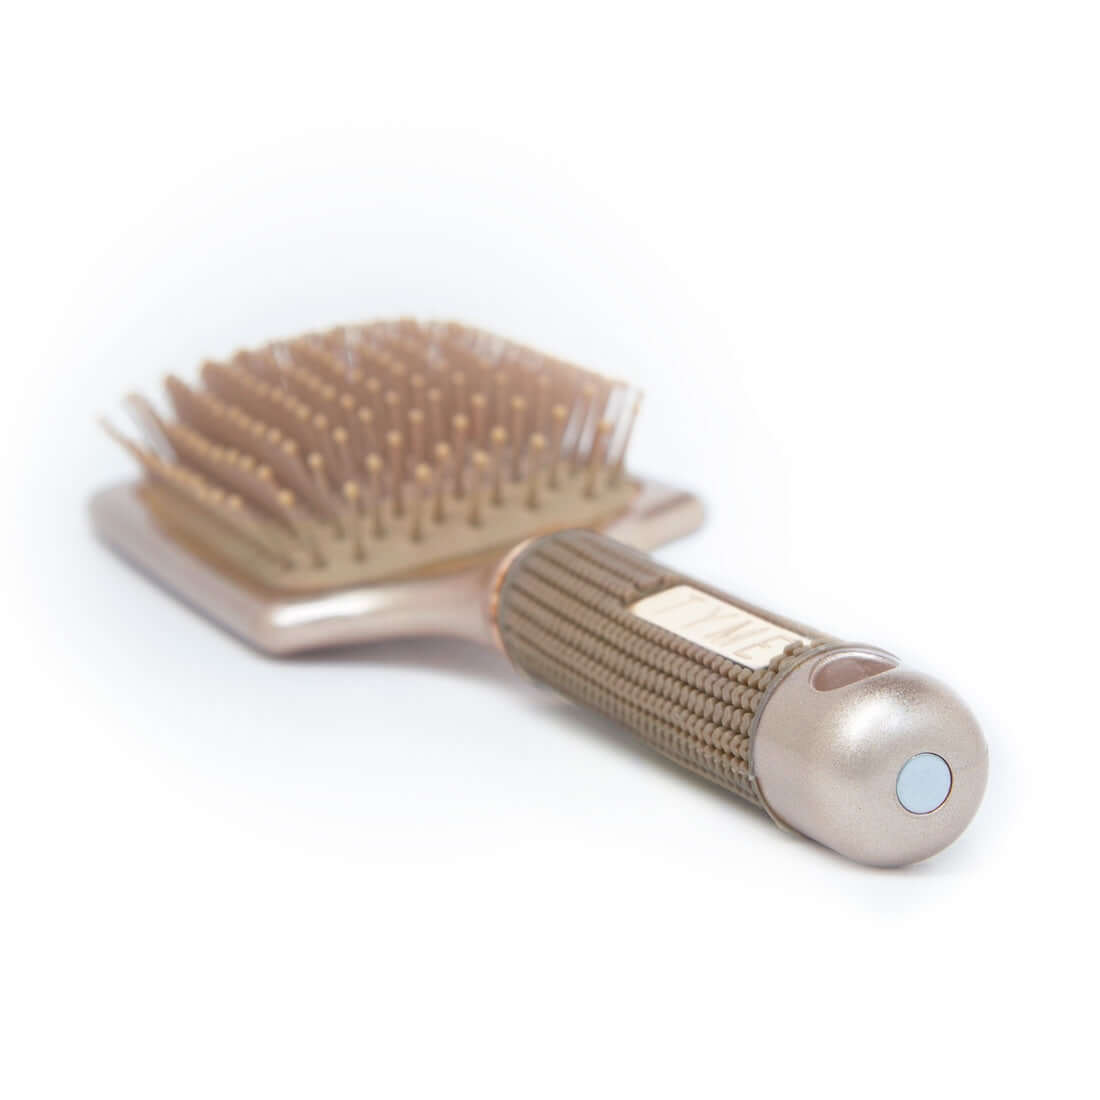 End of handle on TYME Paddle Hair Brush showing hole for hook storage and magnet for alternative storage.